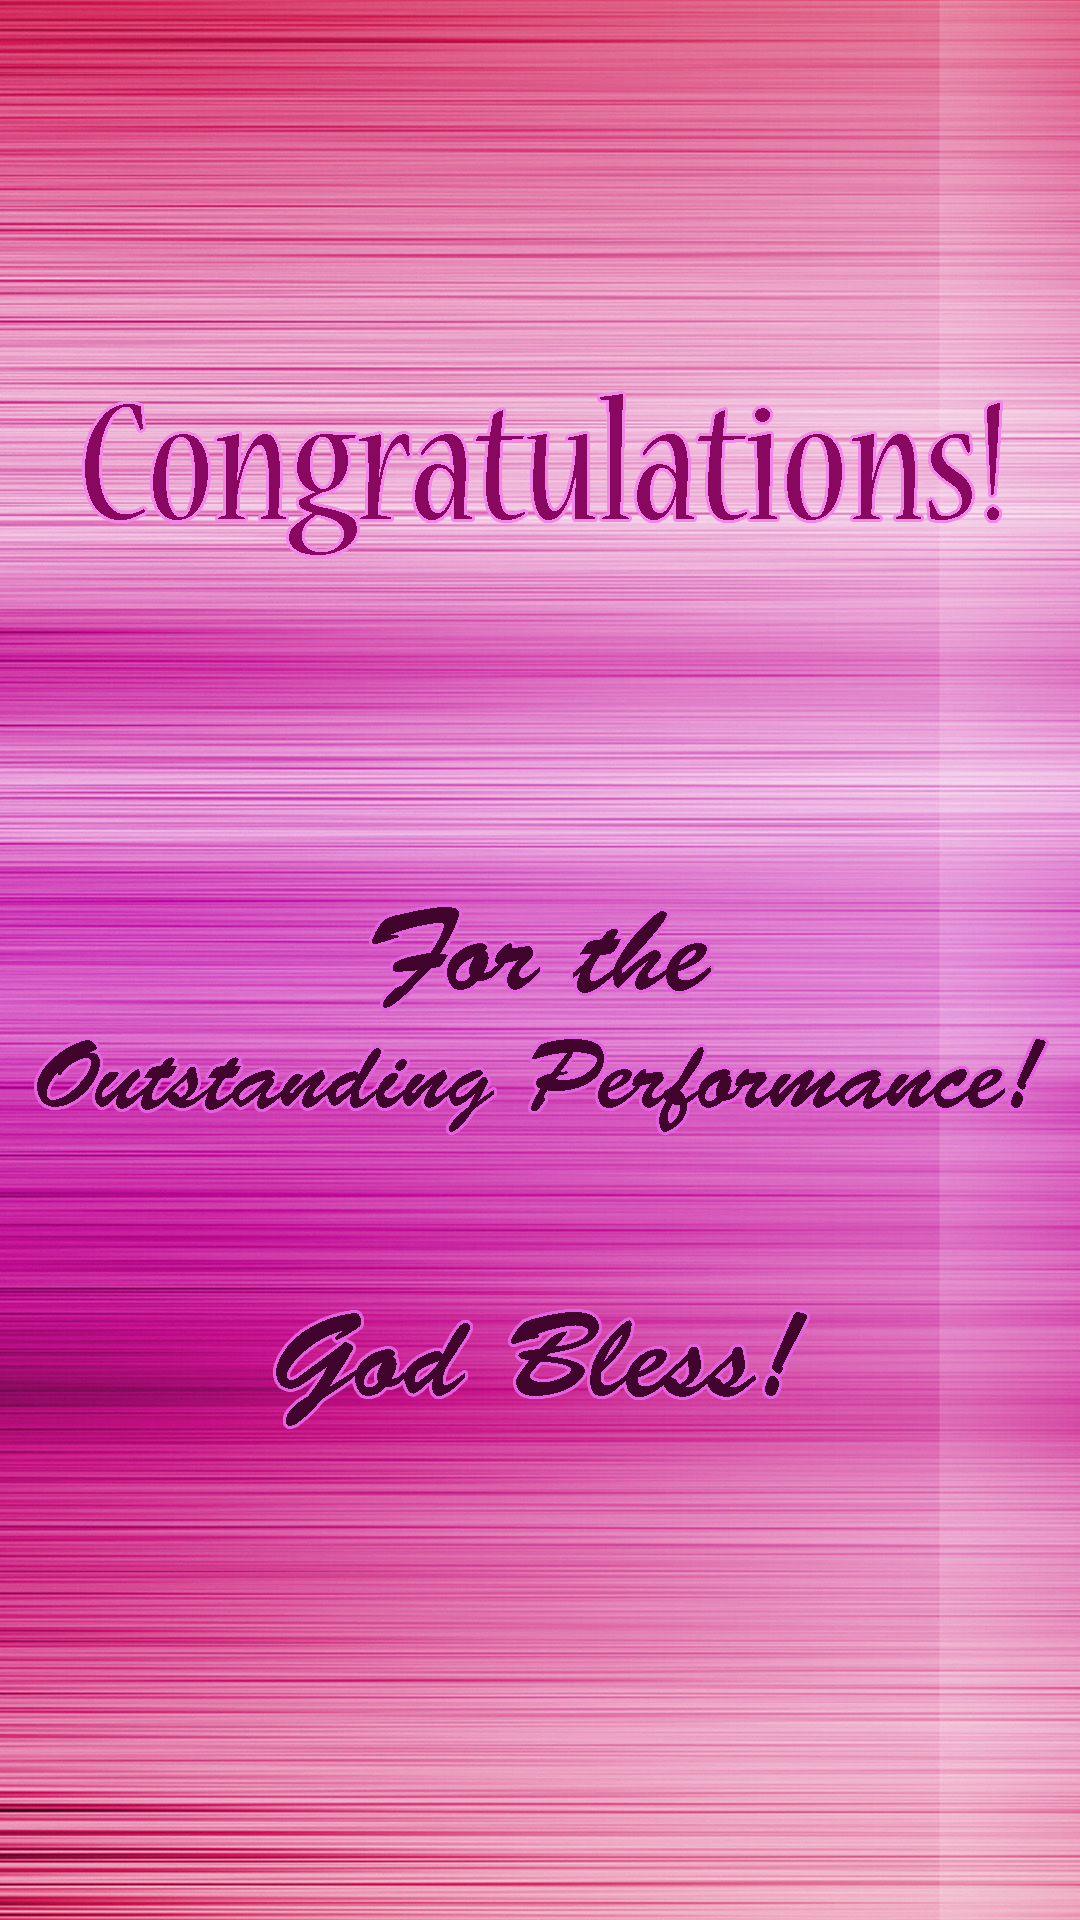 Congratulations Images for All Purposes with Simple Design ...